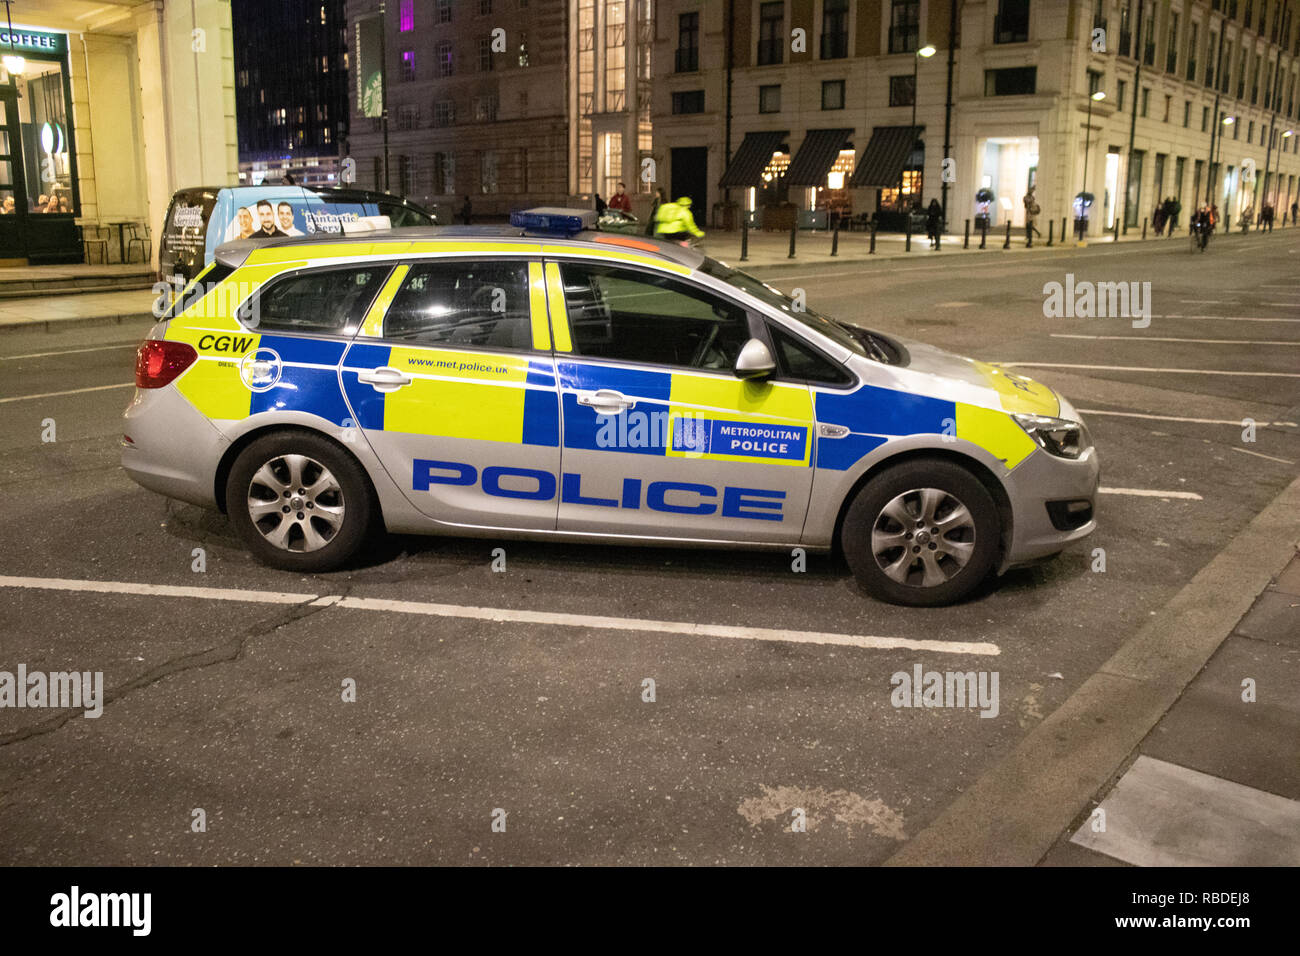 Emergency Service Vehicles in London Stock Photo